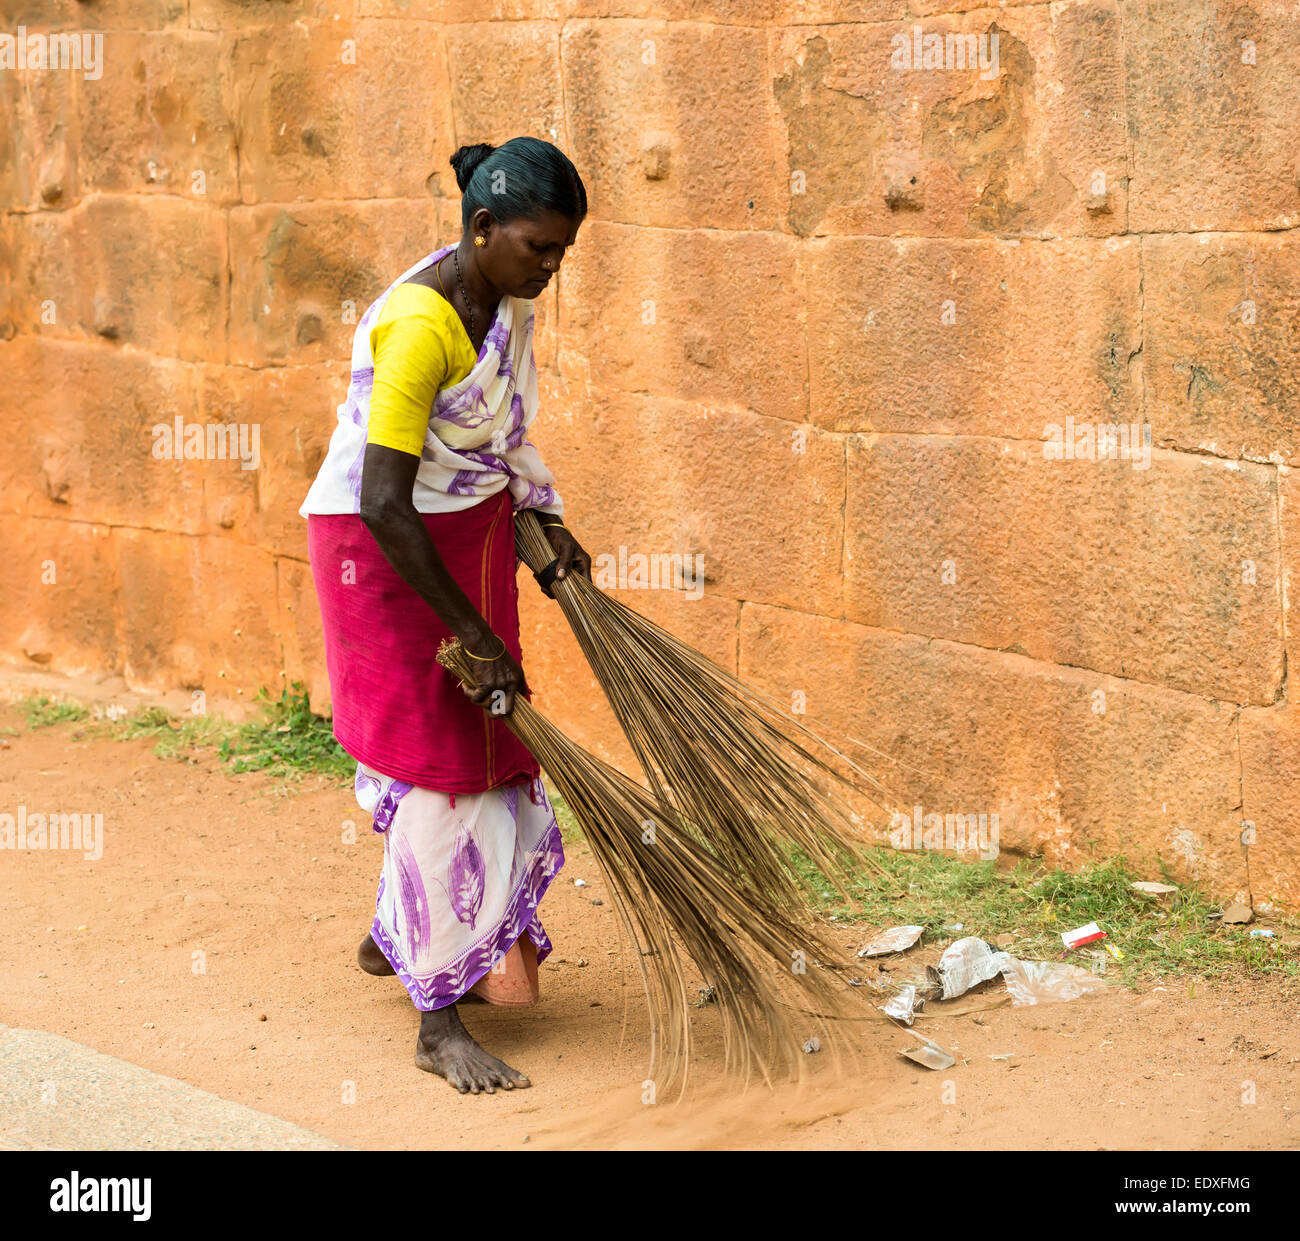 THANJAVUR, INDIA - FEBRUARY 14: An unidentified Indian woman in national dress carries sweeping the two brooms at Brihadishwara Stock Photo